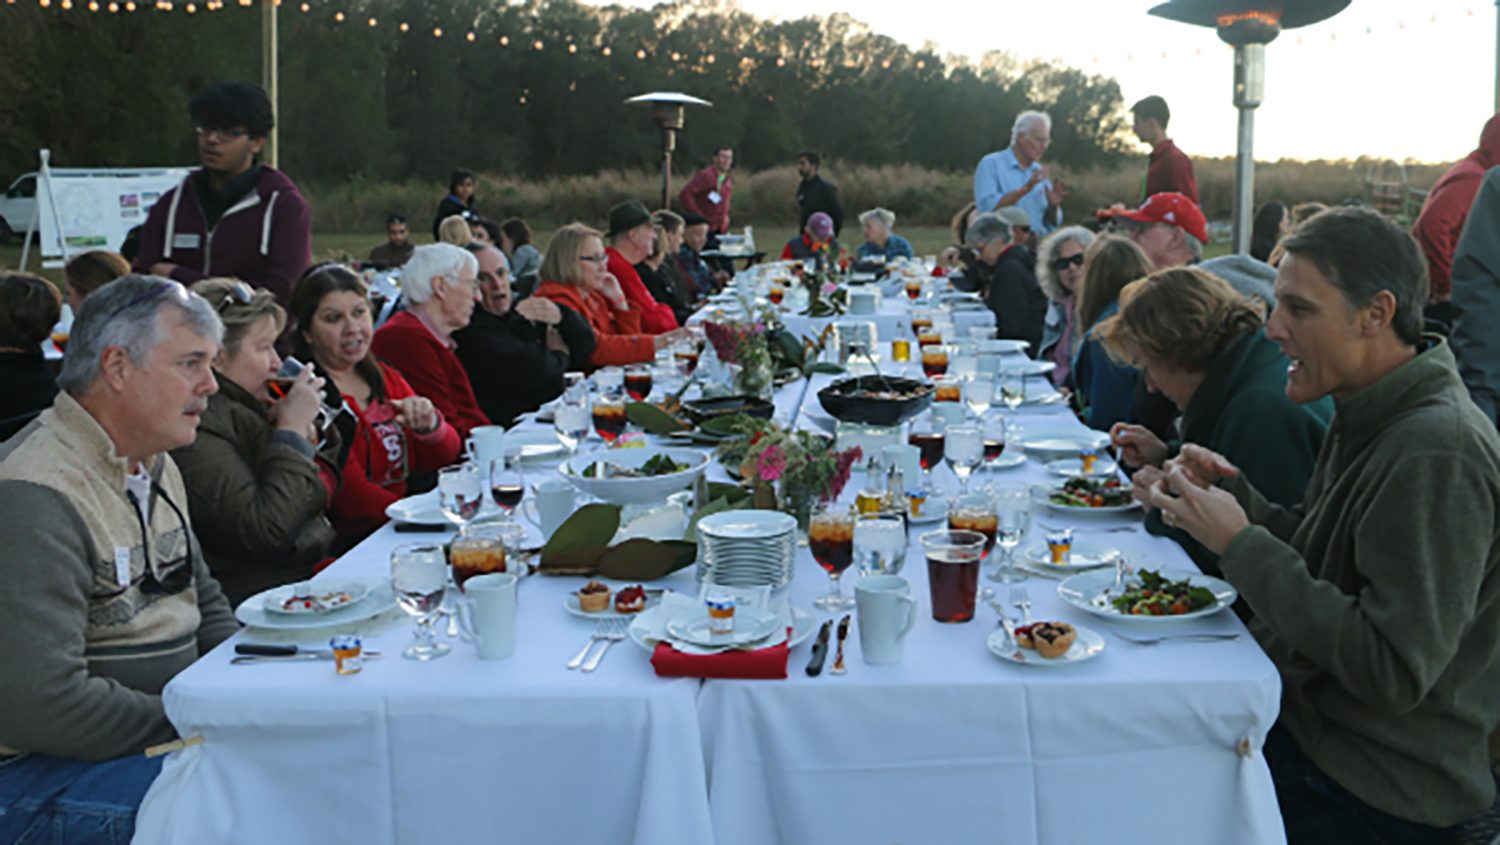 People seated at a long table with white tablecloth